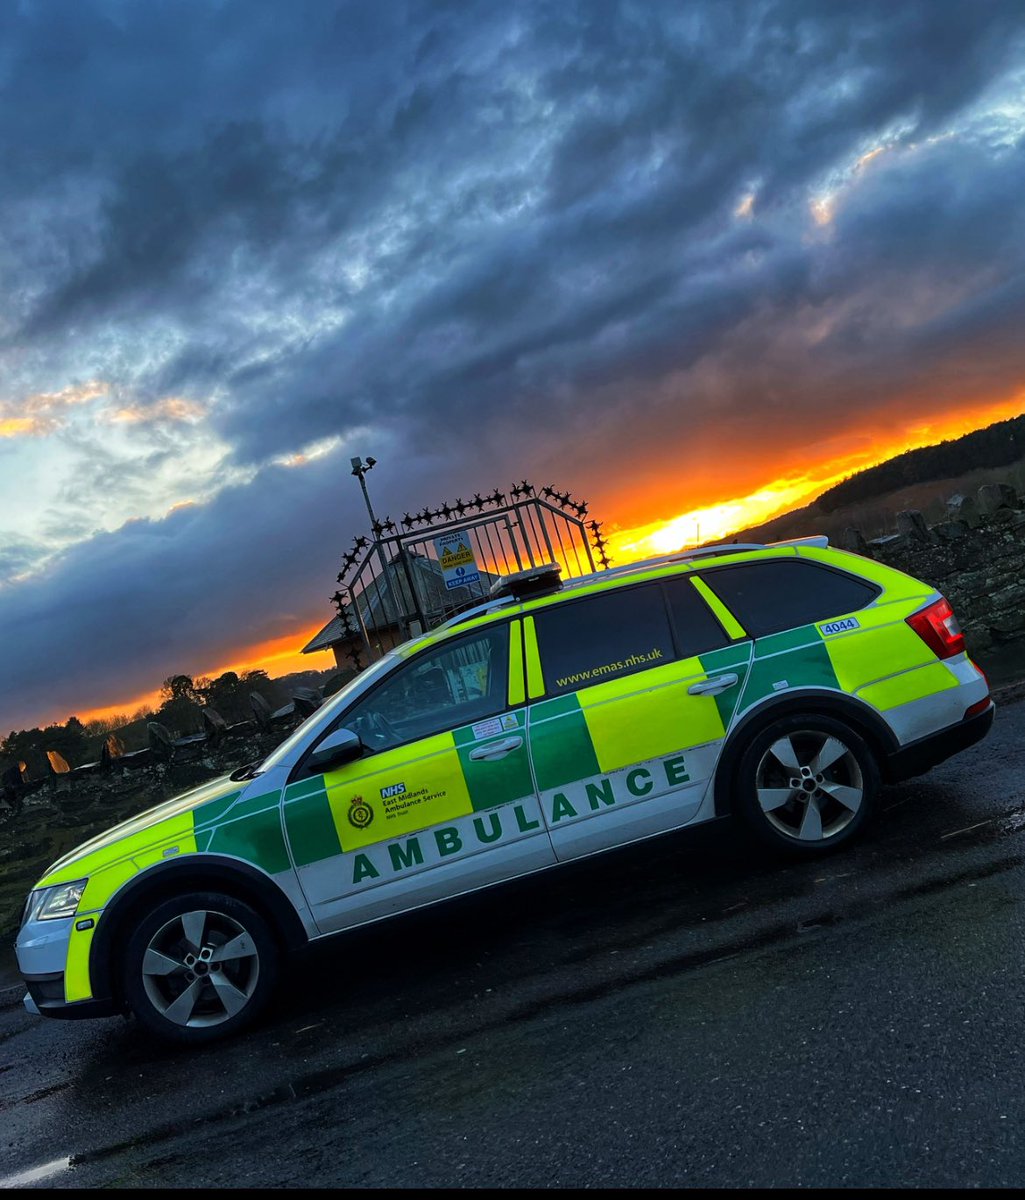 Cheeky sunset shot this evening on the way back to base. Longer days are almost here! @EMASNHSTrust